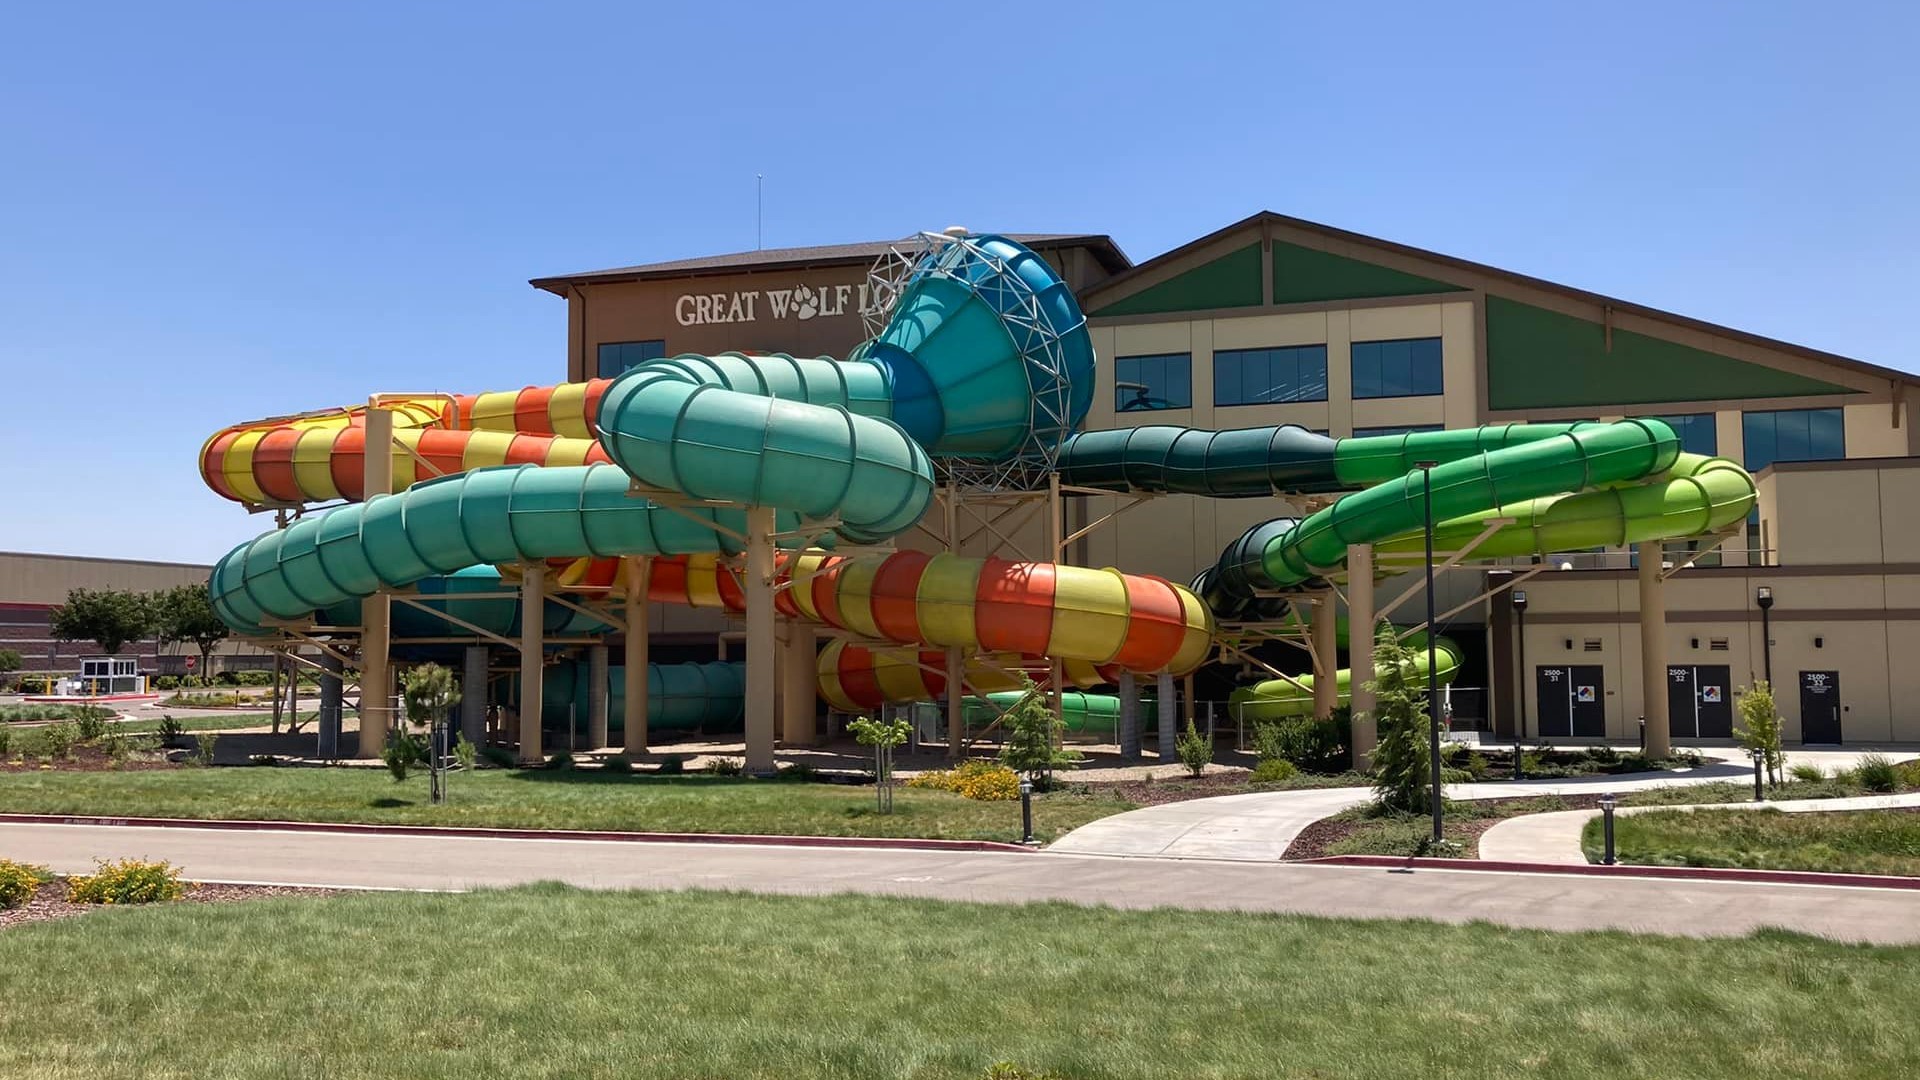 Pricing varies from $50 to $100 per person depending on different factors for a day pass at the Great Wolf Lodge in Manteca.